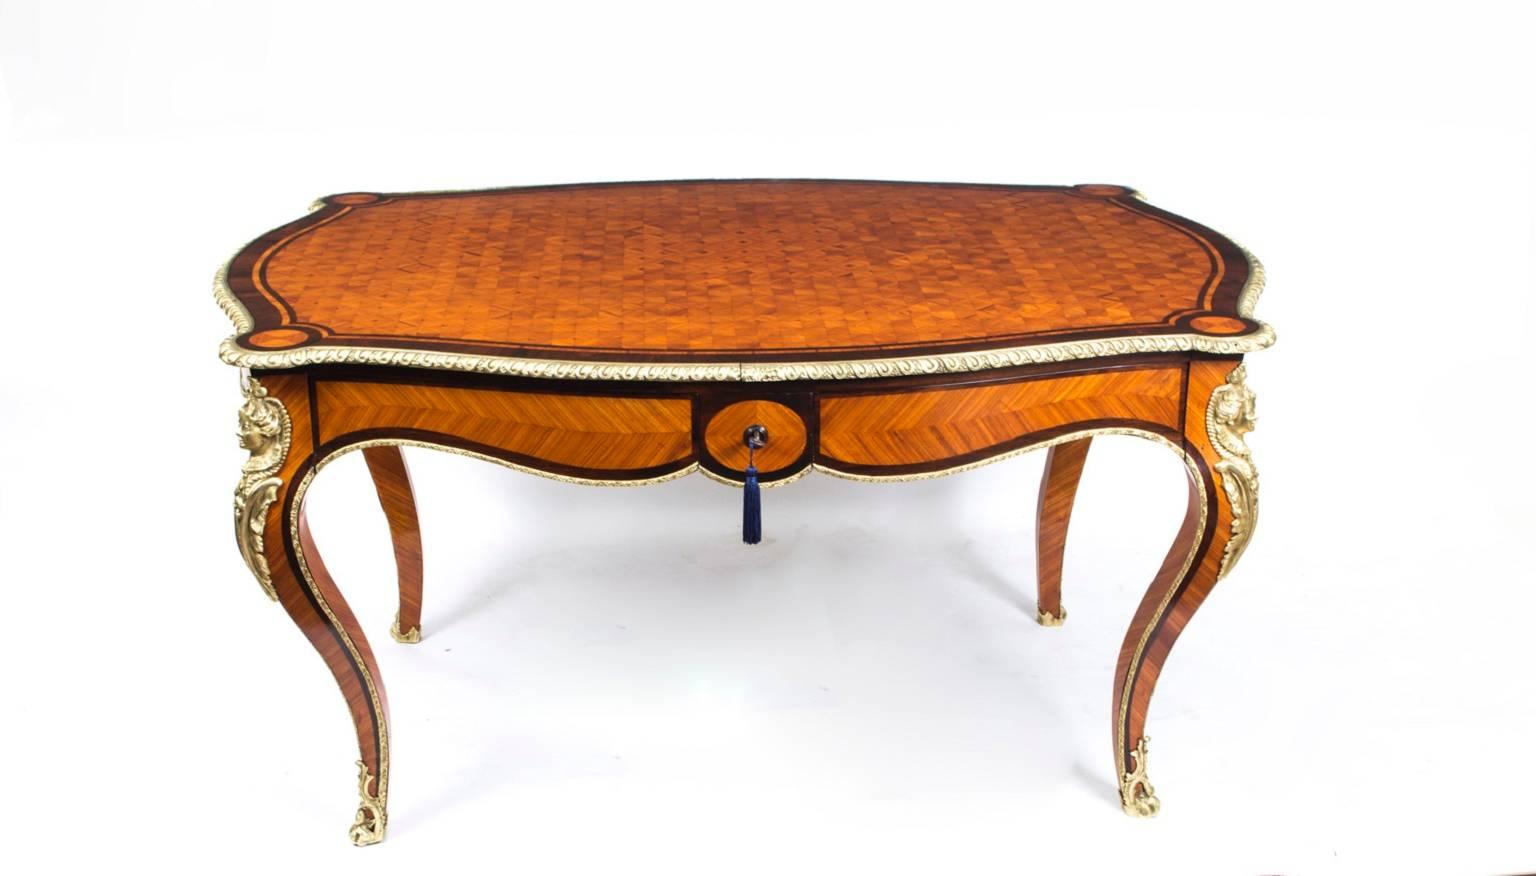 This is an antique bureau plat parquetry writing table of French manufacture dating from Around 1860.

We are delighted to offer for sale this very attractive French ormolu mounted parquetry antique bureau plat, which is alternatively known as a